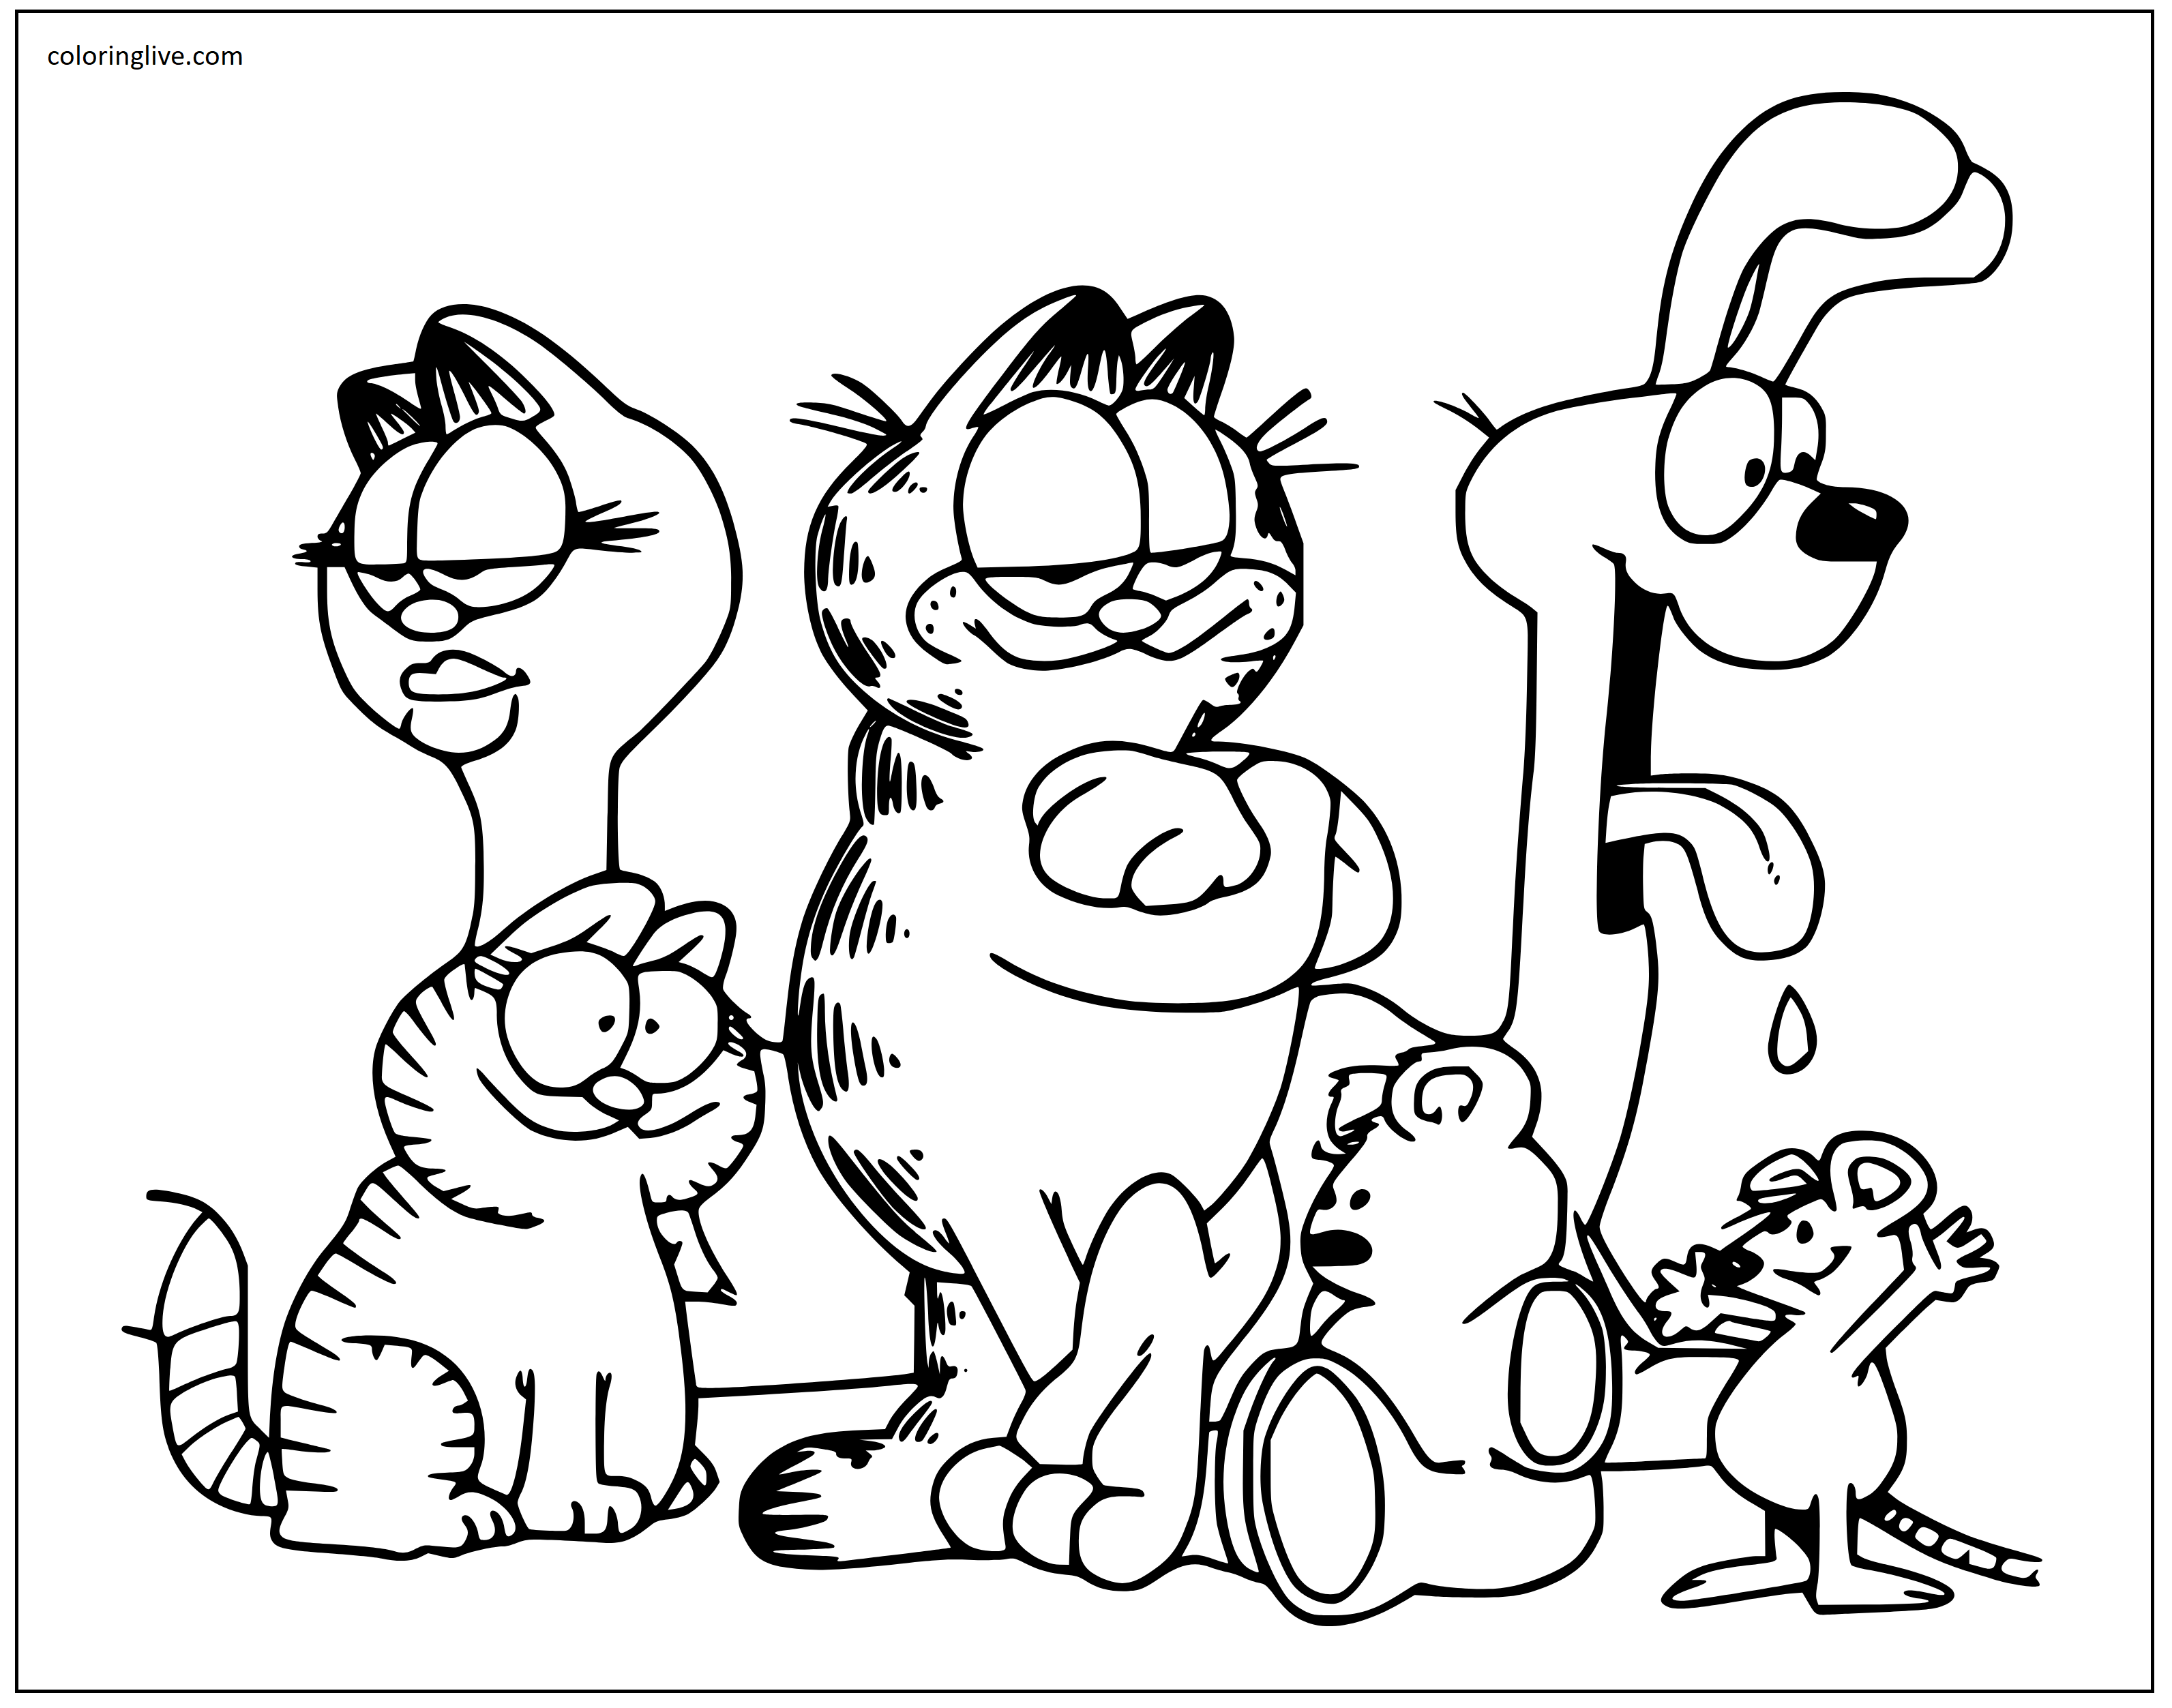 Printable Garfield and Odie Coloring Page for kids.